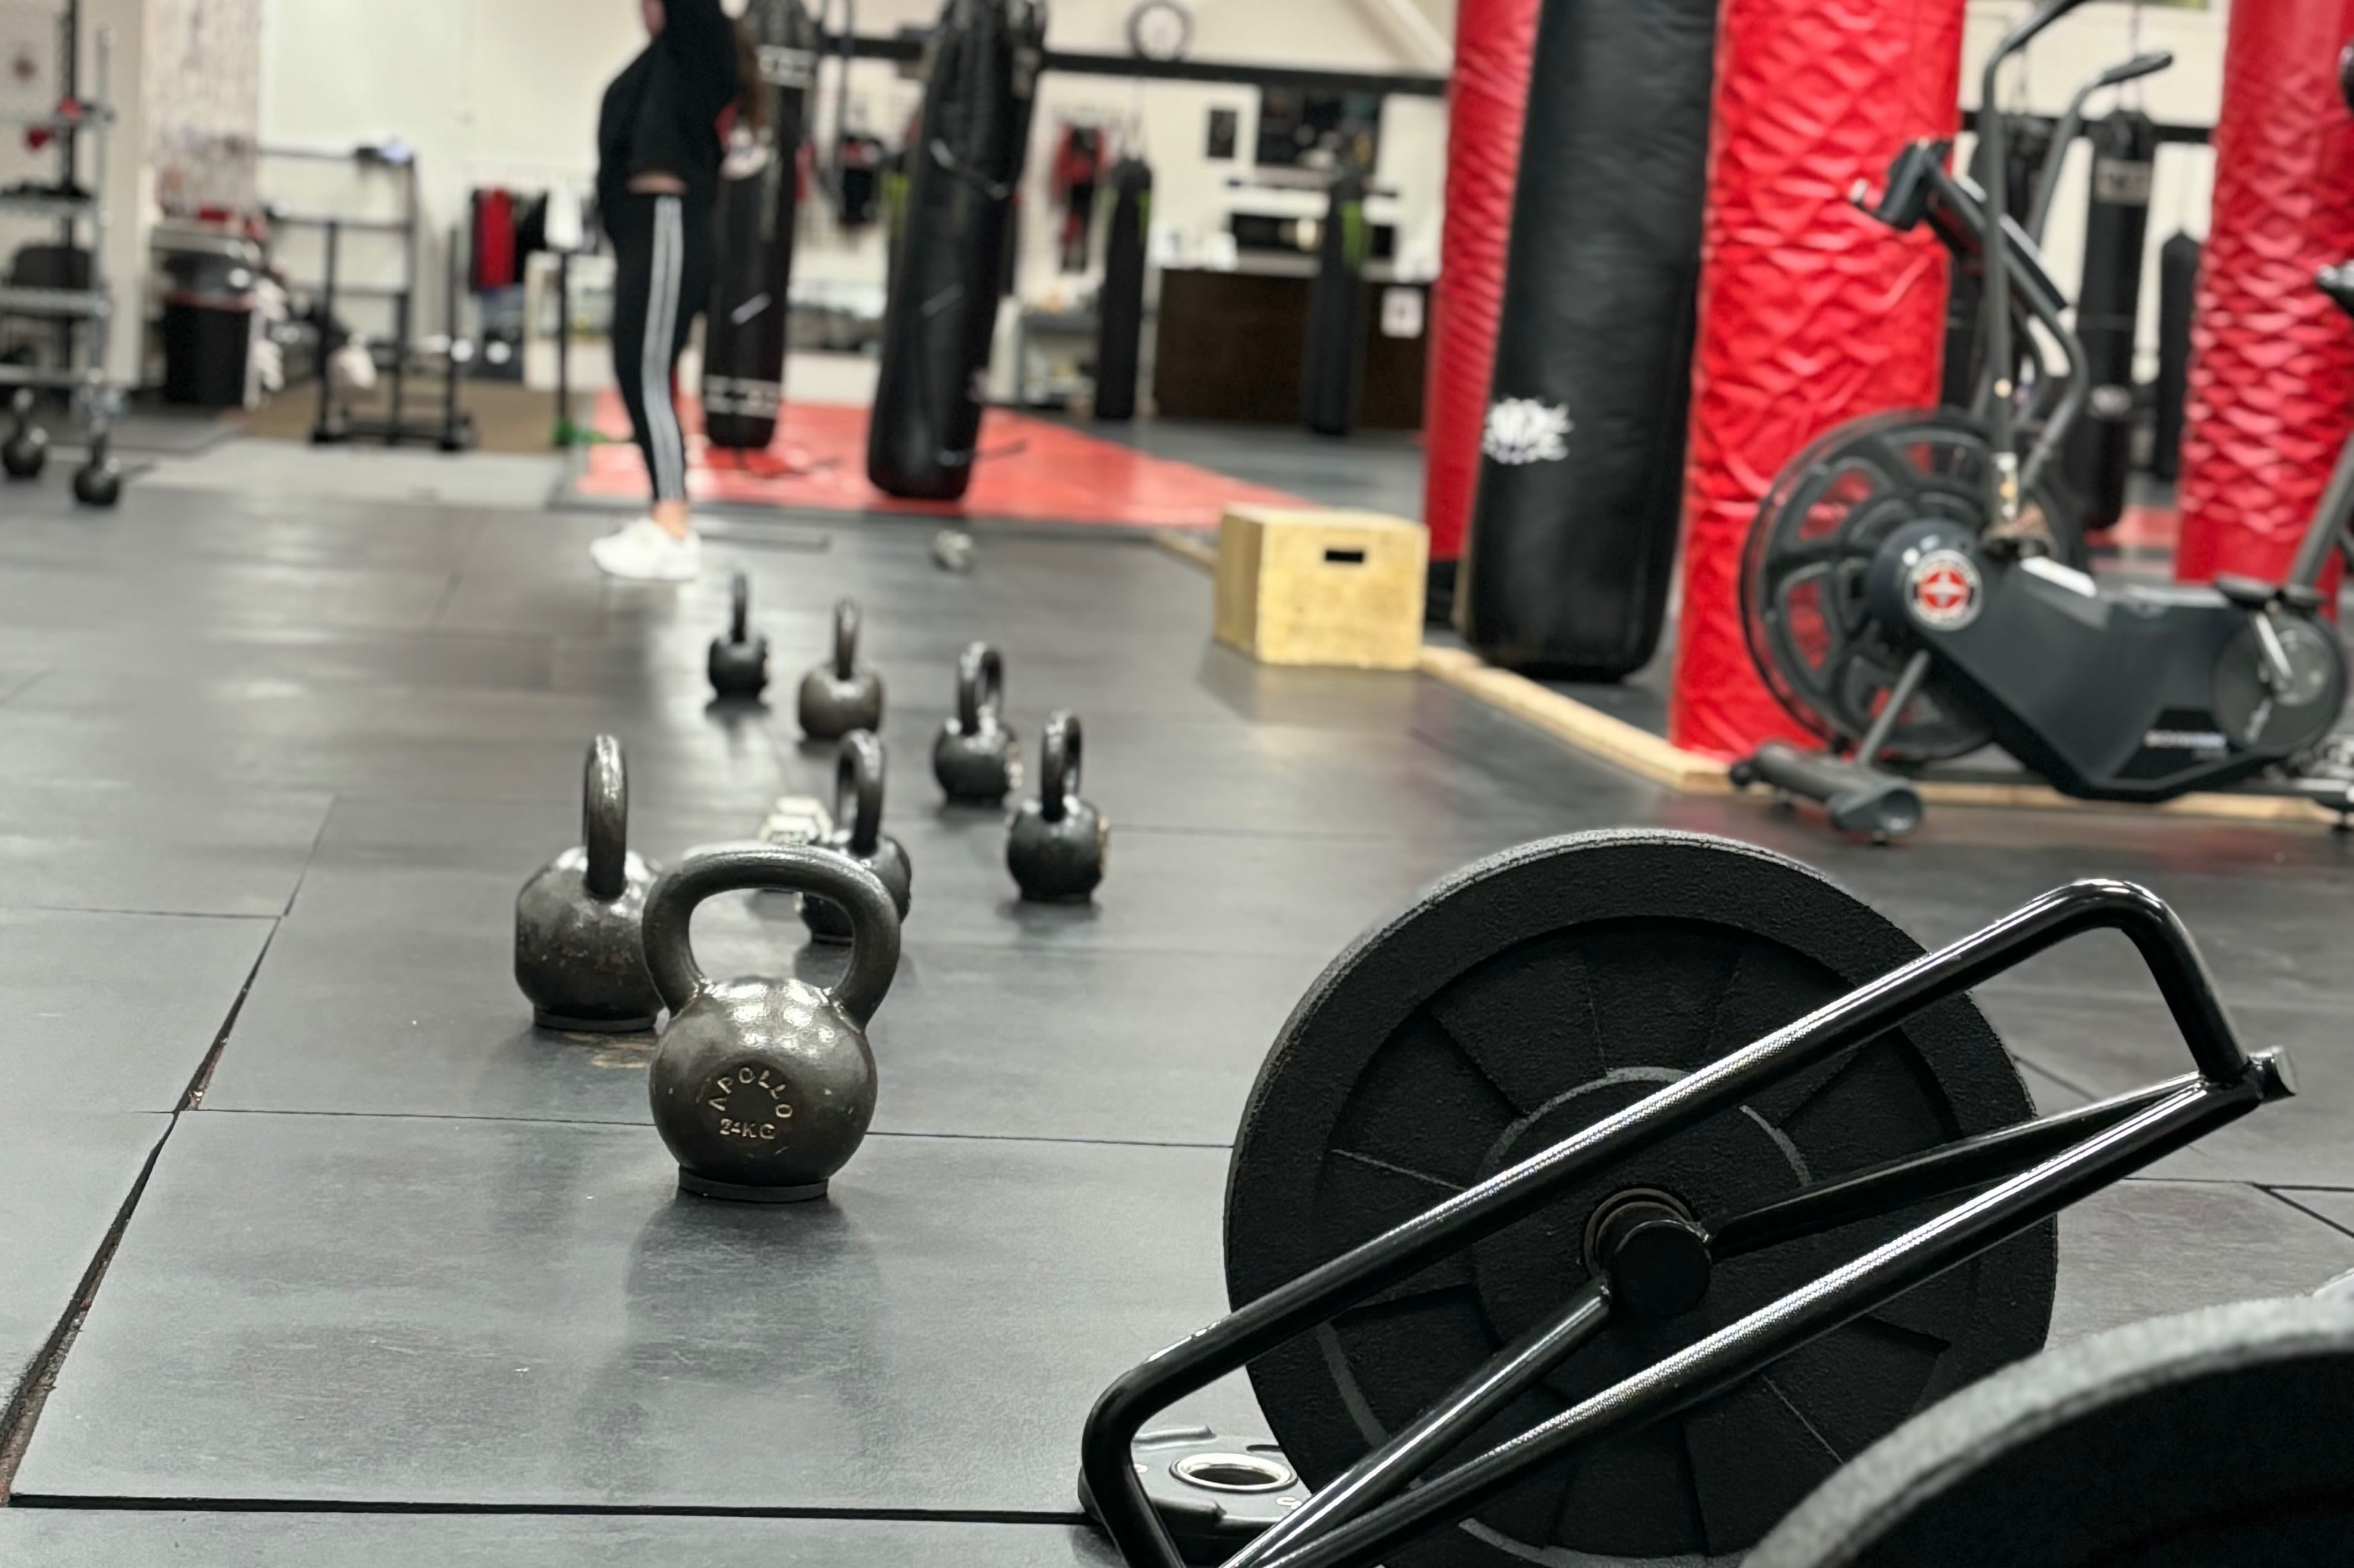 Antdawgs Mma Training Center Read Reviews And Book Classes On Classpass 9399